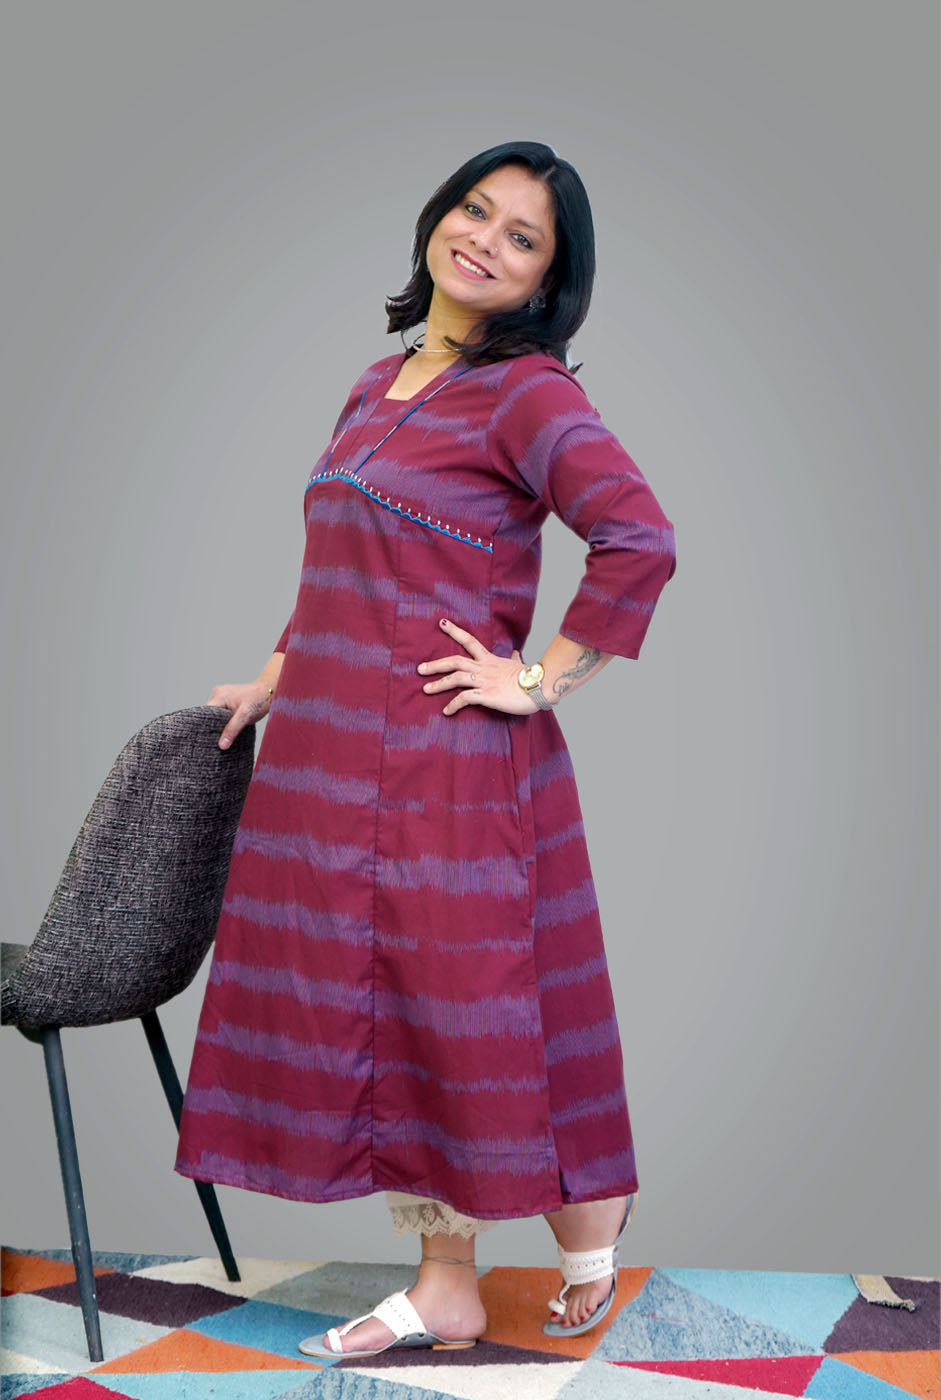 Maroon Color Exclusive Ikat Kurti with Embroidery Detailing